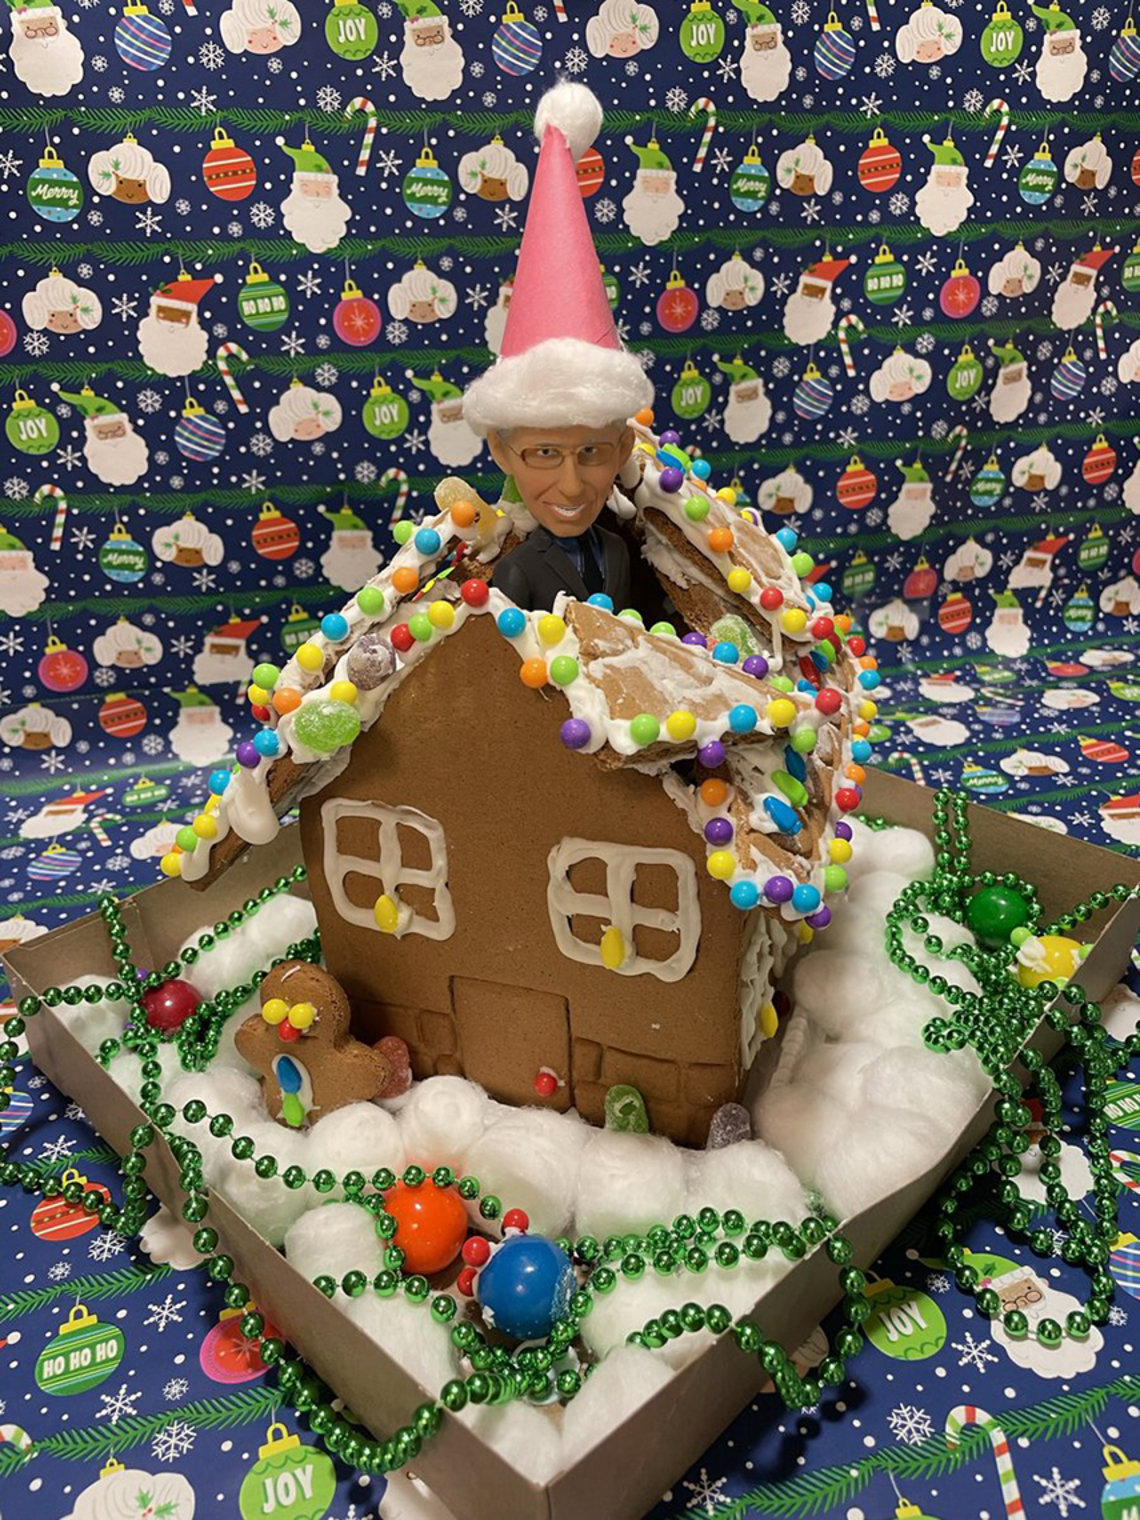 A Dr. Fauci bobblehead pops out of a gingerbread house